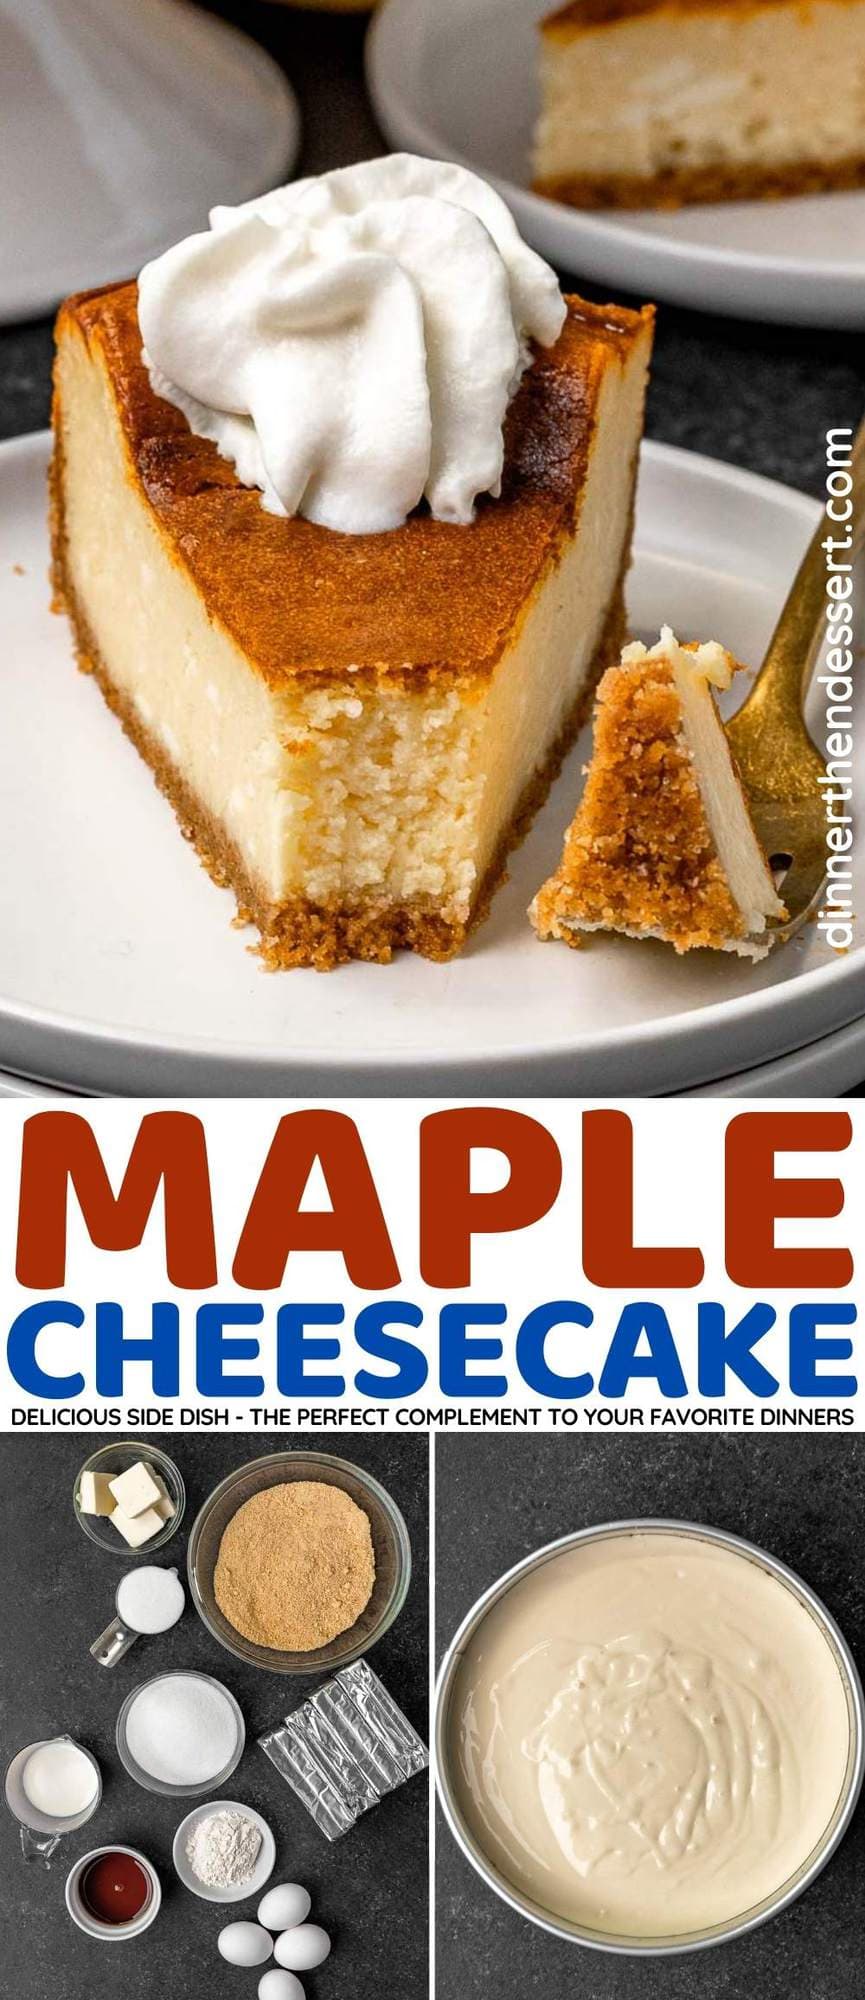 Maple Cheesecake collage